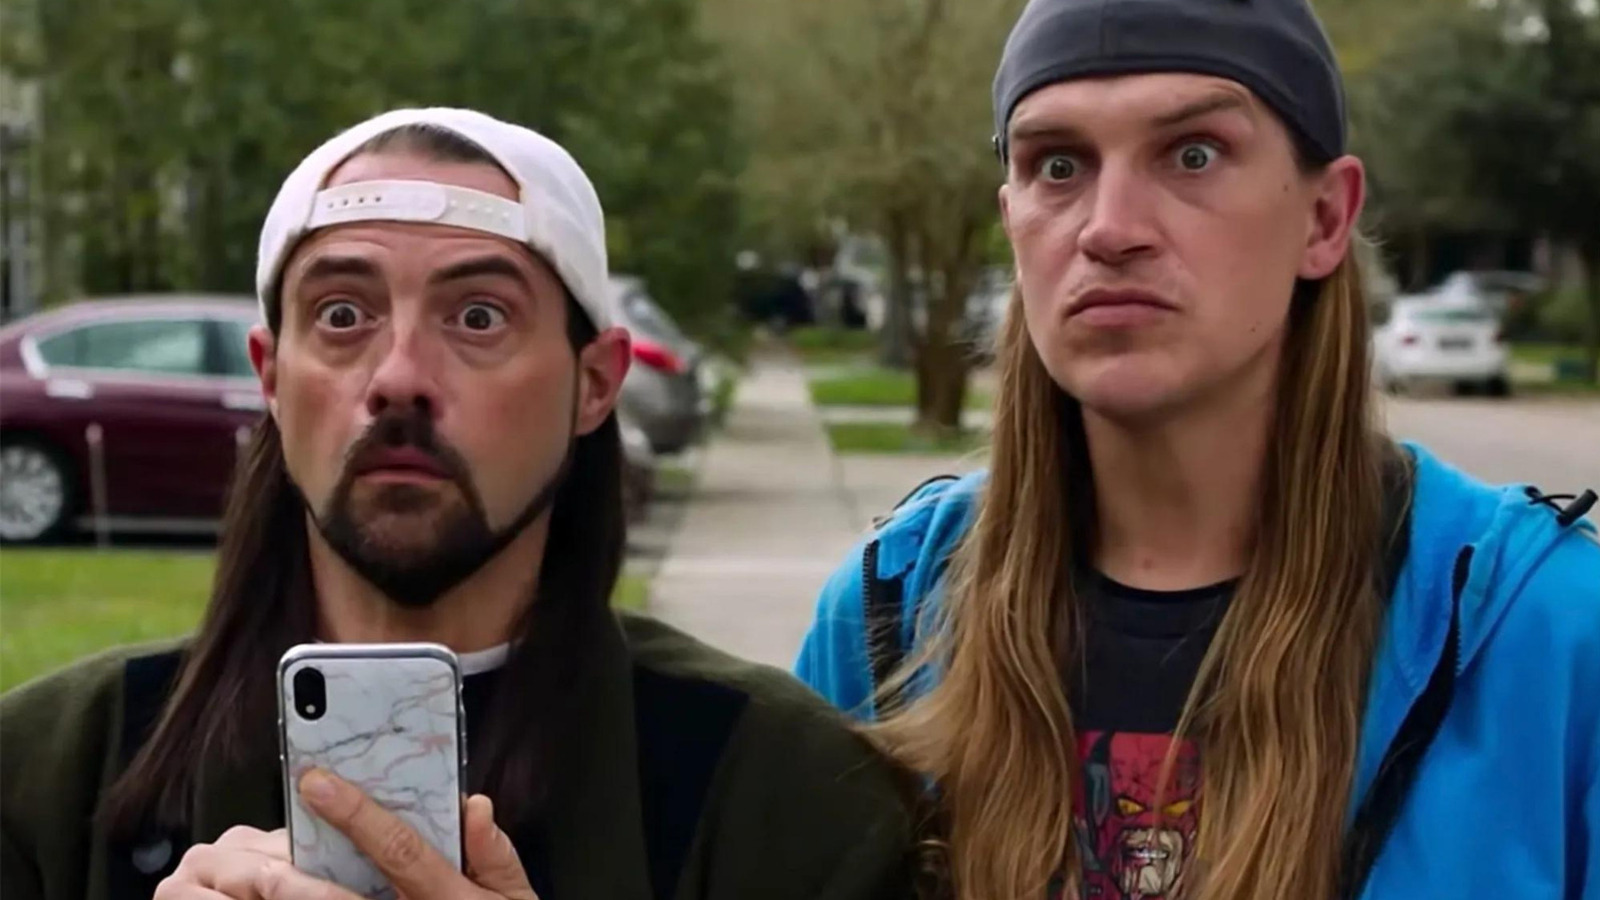 Superman Lives, Dogma II, and 10 Other Movies and TV Shows Kevin Smith Almost Made